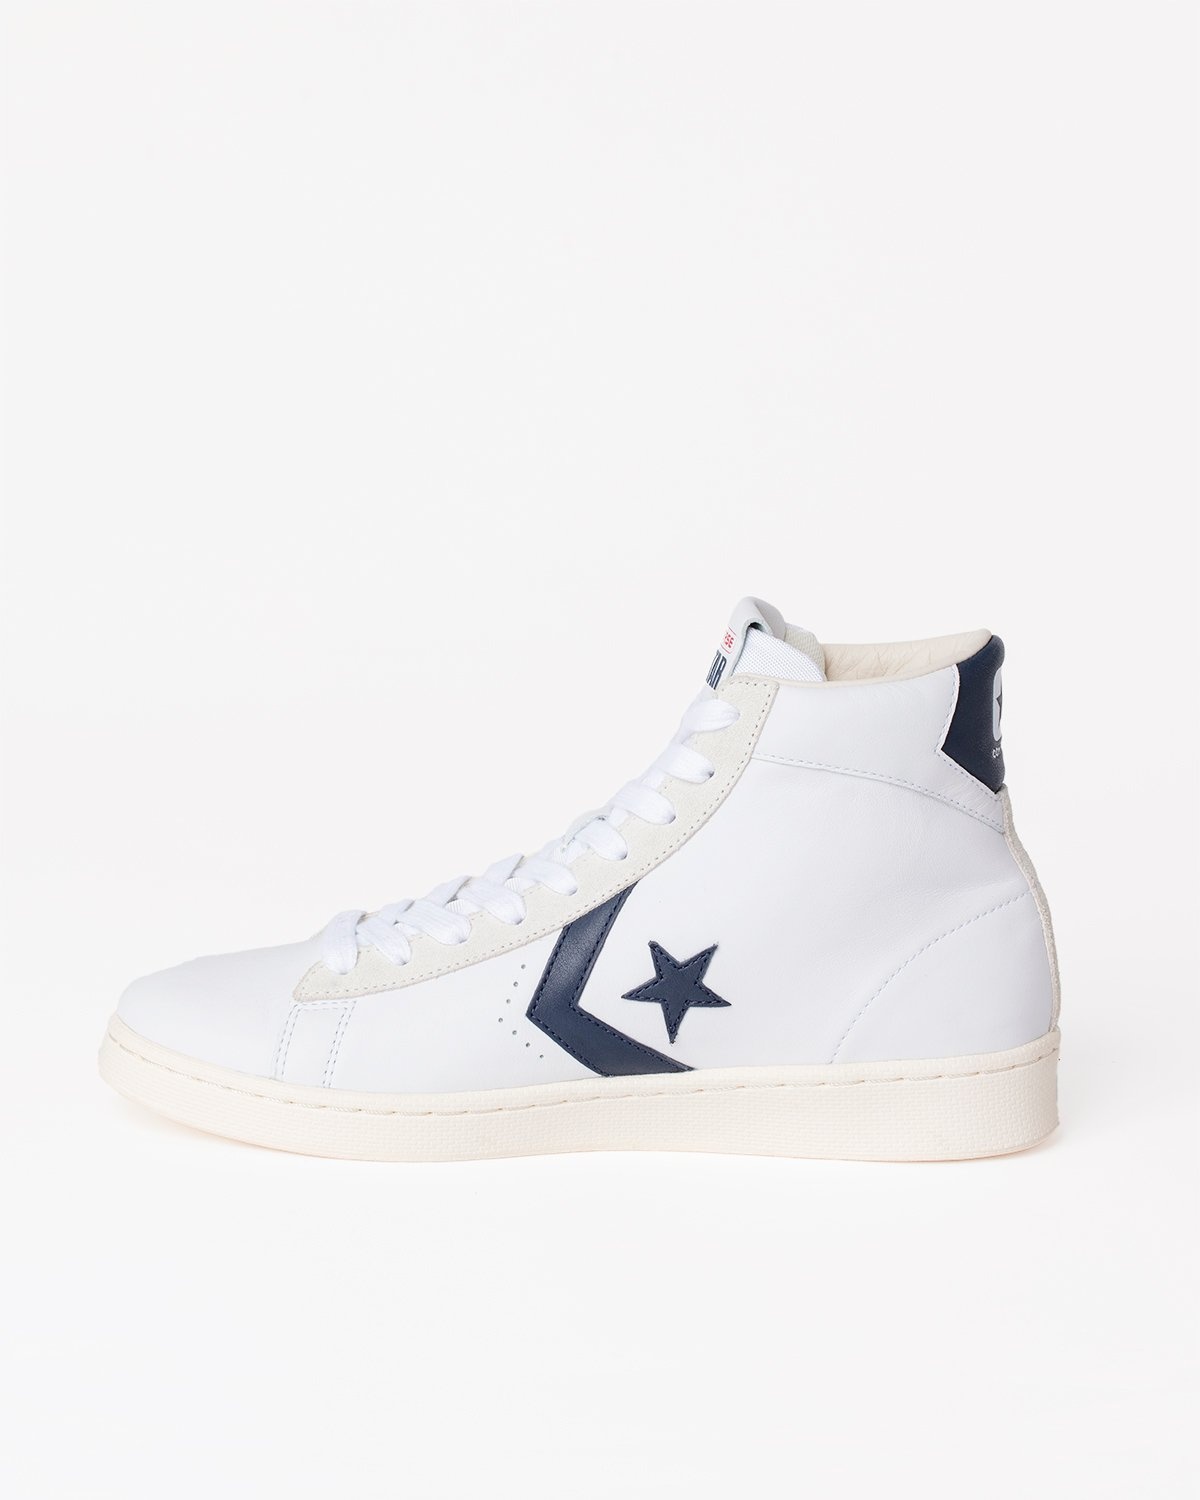 Converse – Pro Leather OG Mid White/Obsidian/Egret - Sneakers - White - Image 6